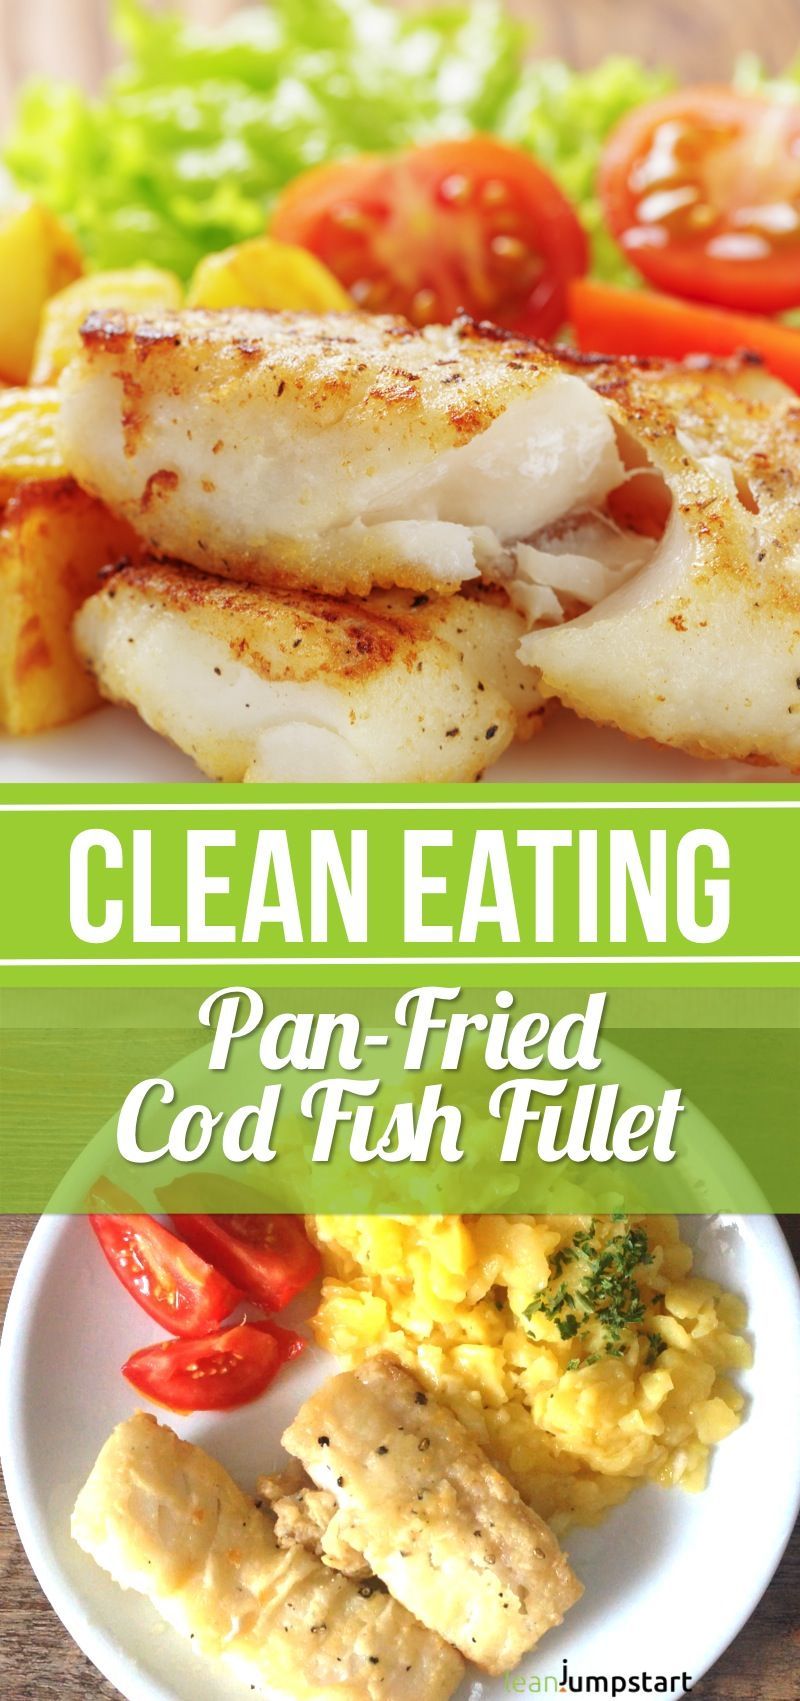 From all codfish recipes I know, this pan-fried clean eating cod fish might be the quickest. It is very simple to do at home. Click here to learn more! -   20 cod fish recipes
 ideas